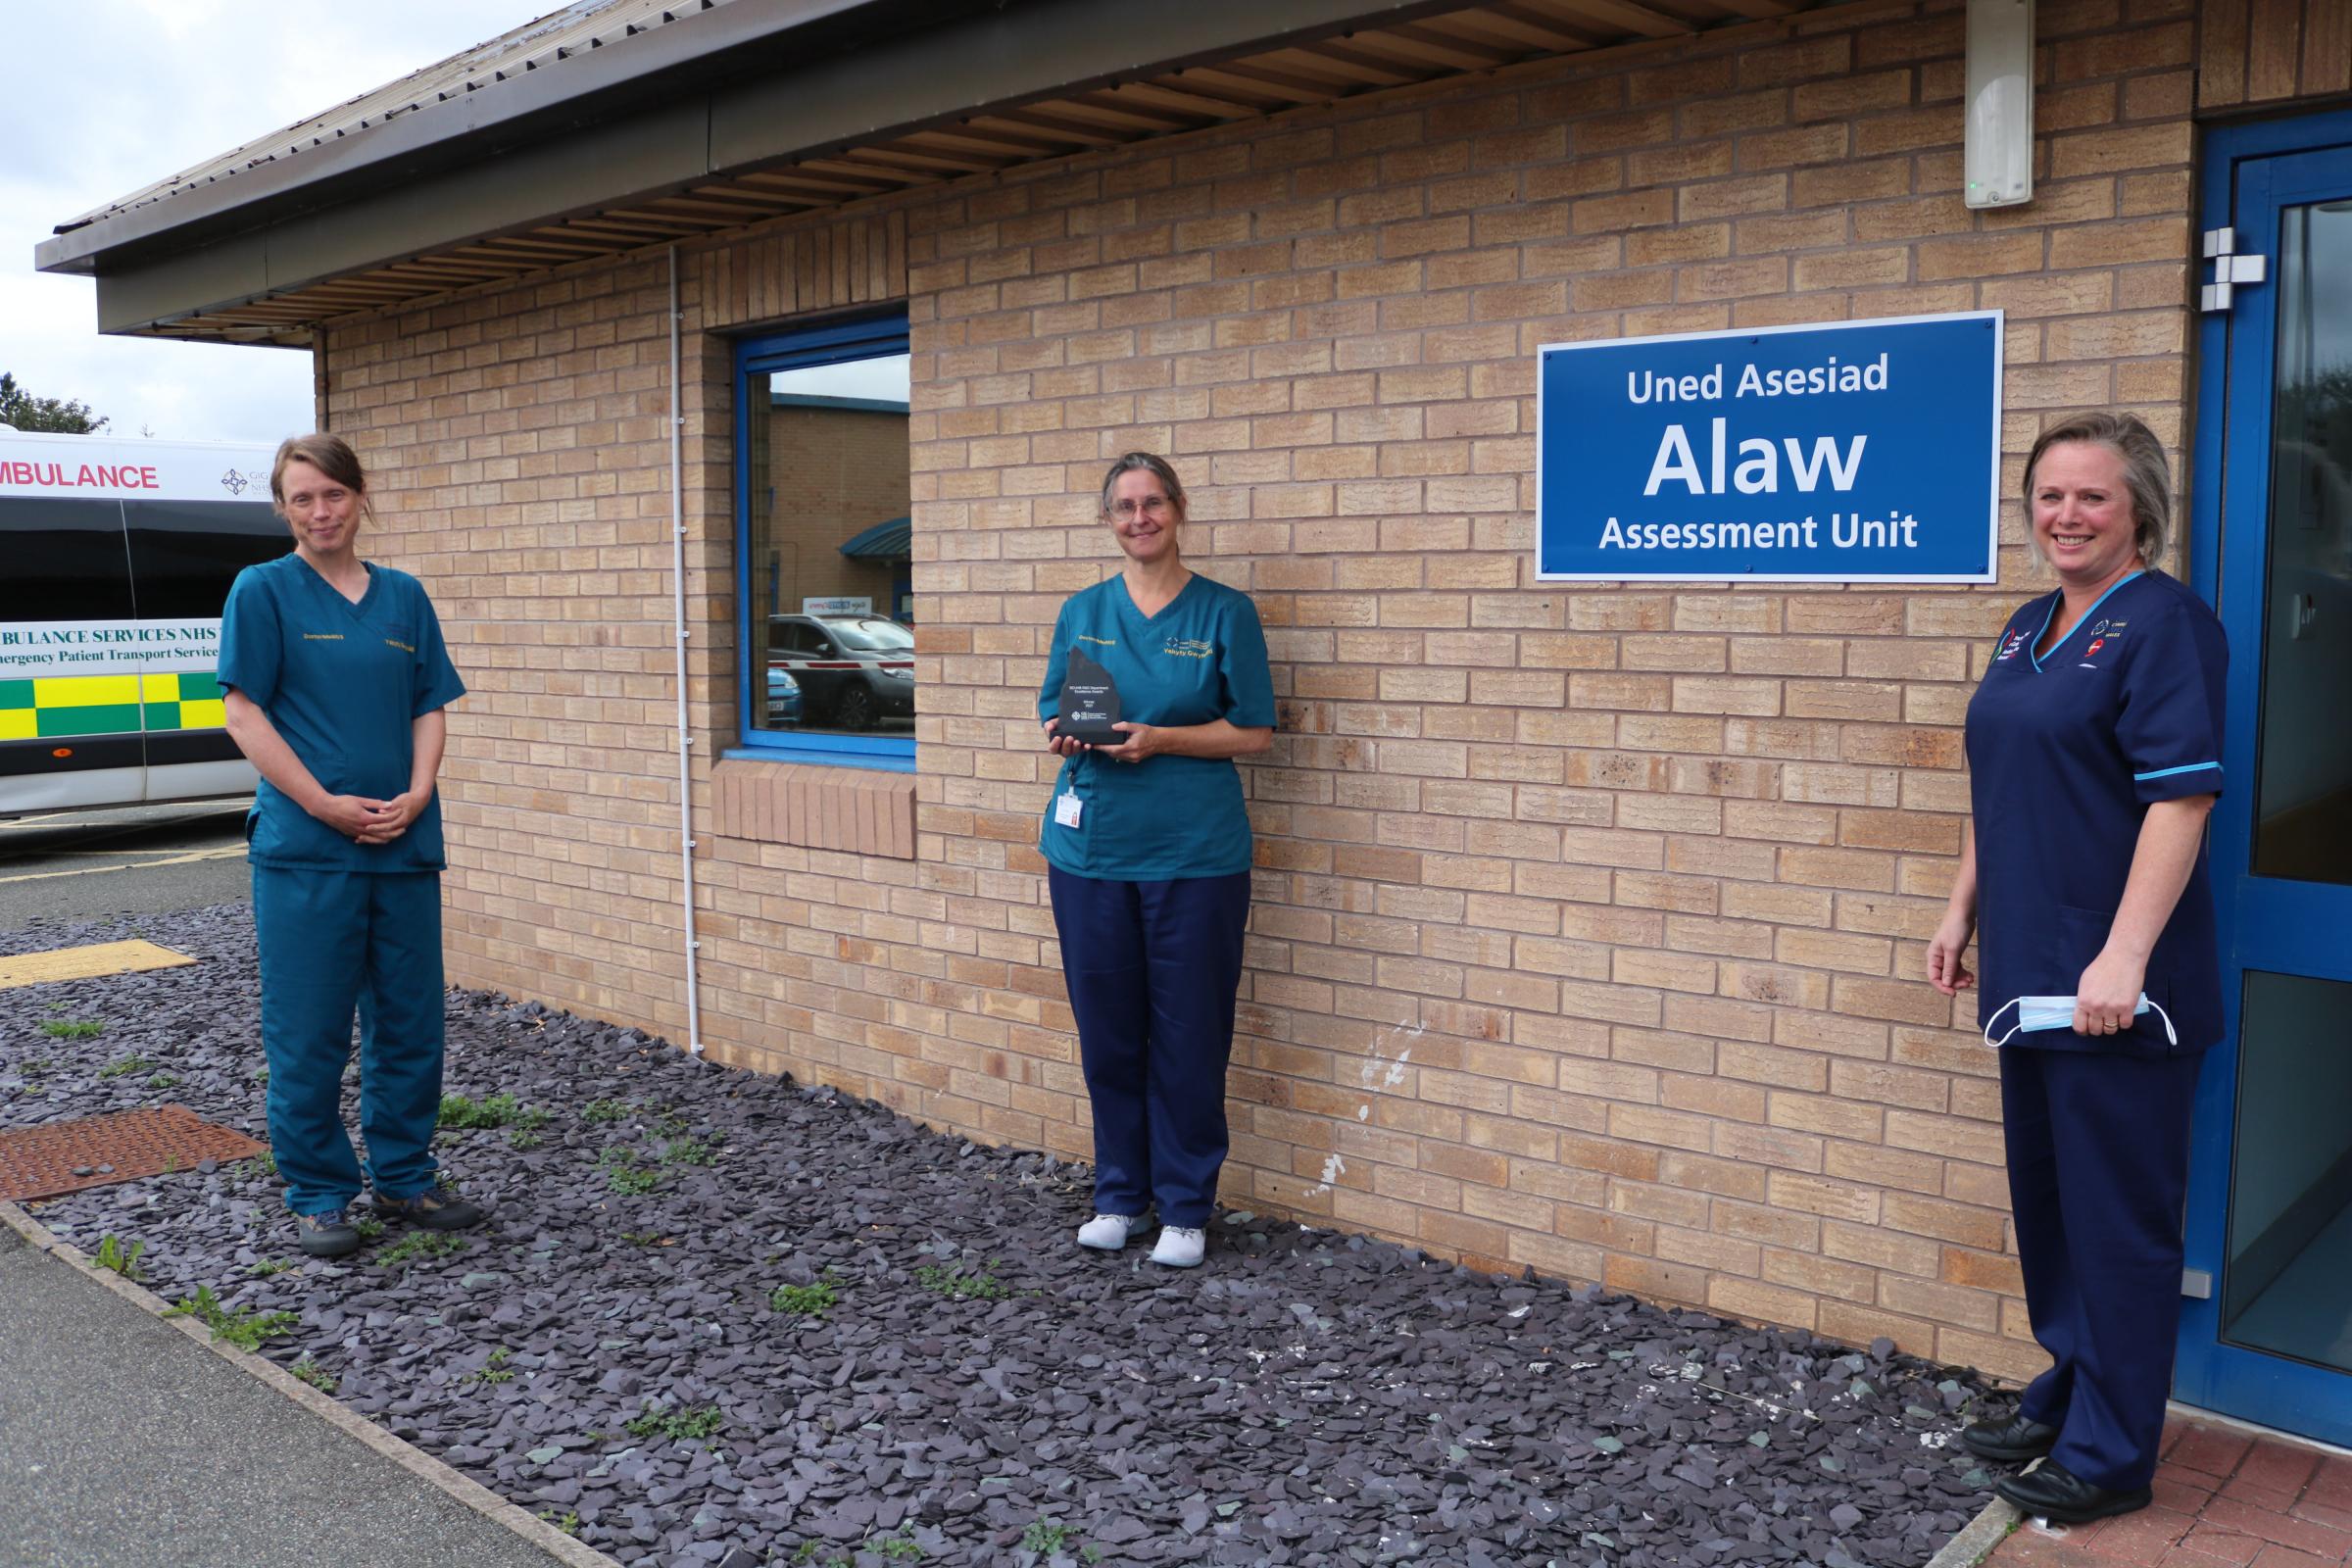 (l-r) Dr Anna Mullard and Dr Catherine Bale with their award and Alice Thomas outside the Alaw Unit at Ysbyty Gwynedd. 